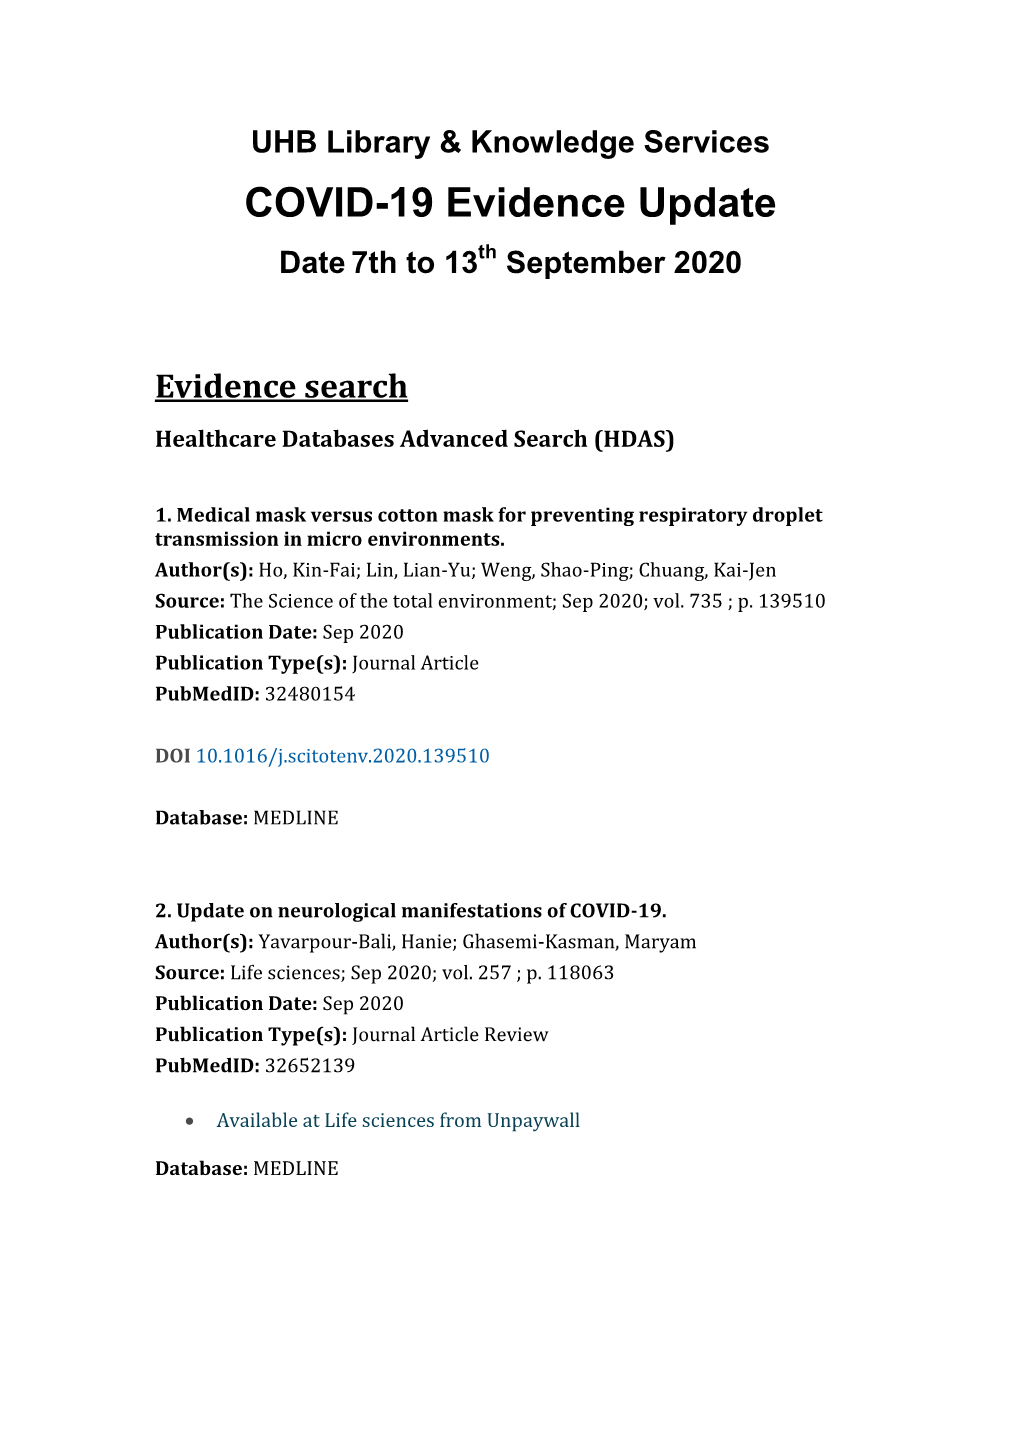 COVID-19 Evidence Update Date 7Th to 13Th September 2020